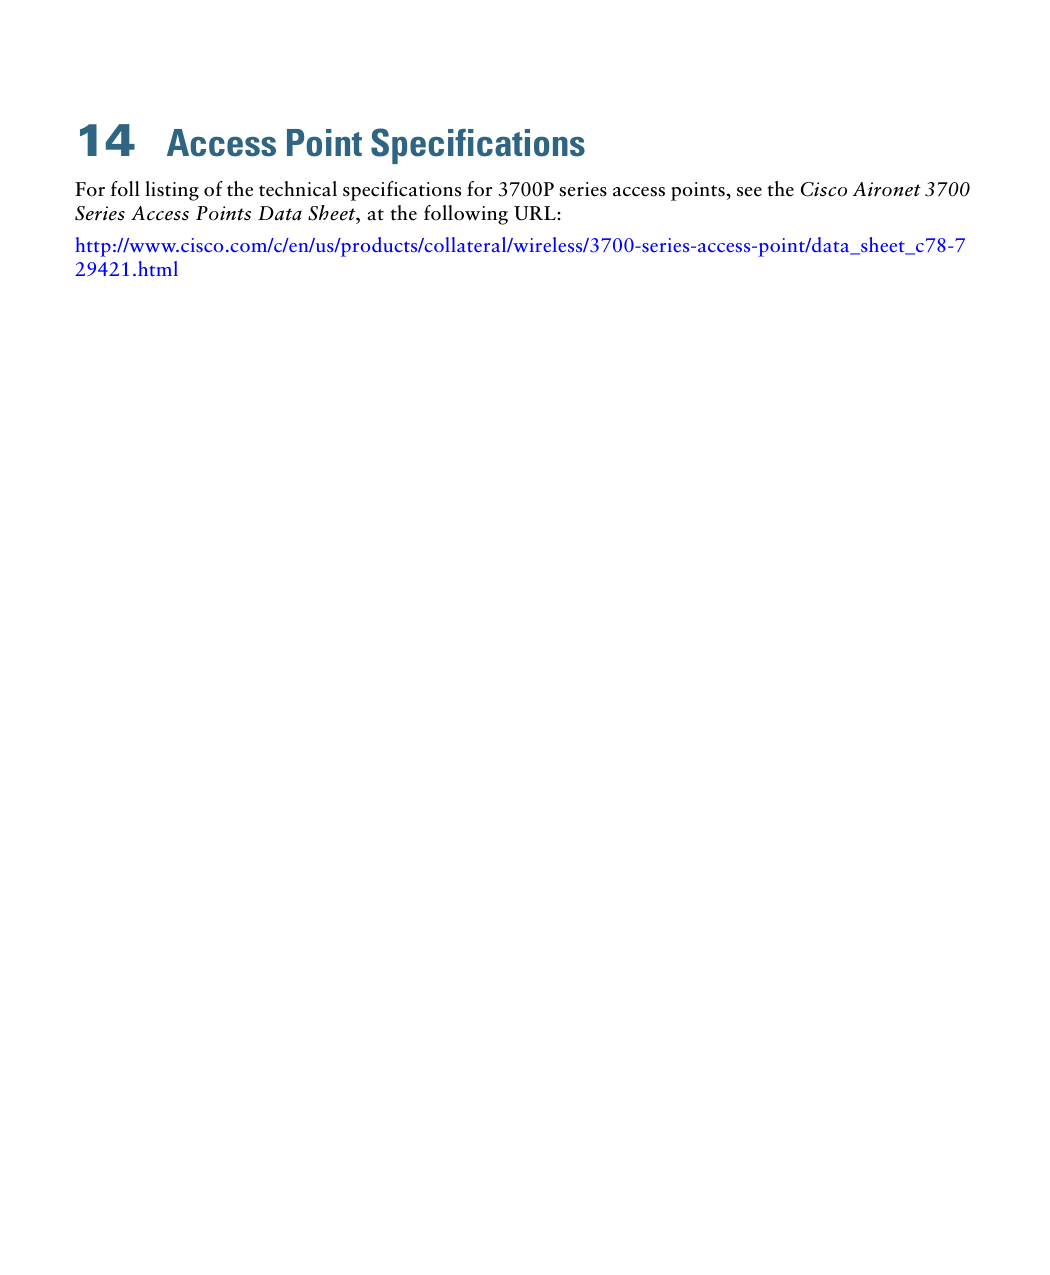 14  Access Point SpecificationsFor foll listing of the technical specifications for 3700P series access points, see the Cisco Aironet 3700 Series Access Points Data Sheet, at the following URL:http://www.cisco.com/c/en/us/products/collateral/wireless/3700-series-access-point/data_sheet_c78-729421.html